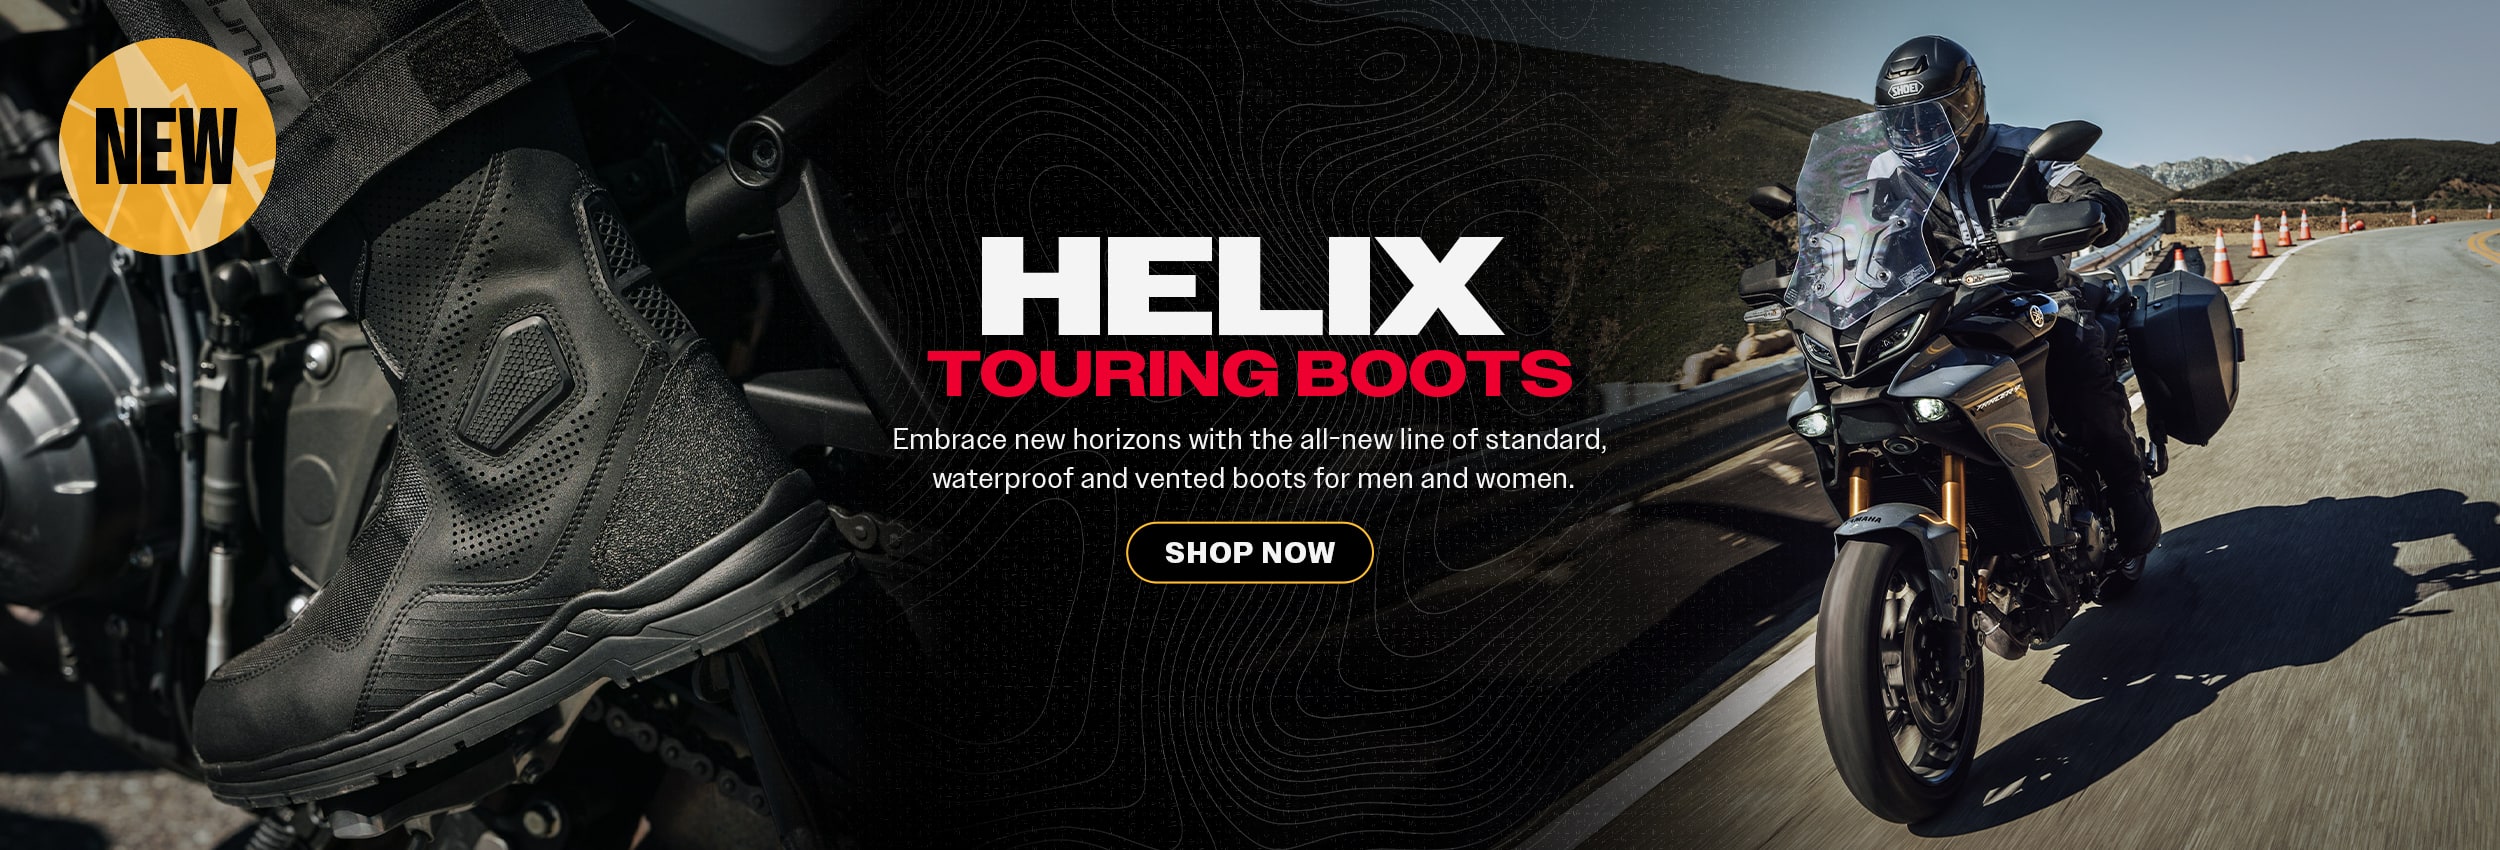 Tourmaster Helix Touring Boots